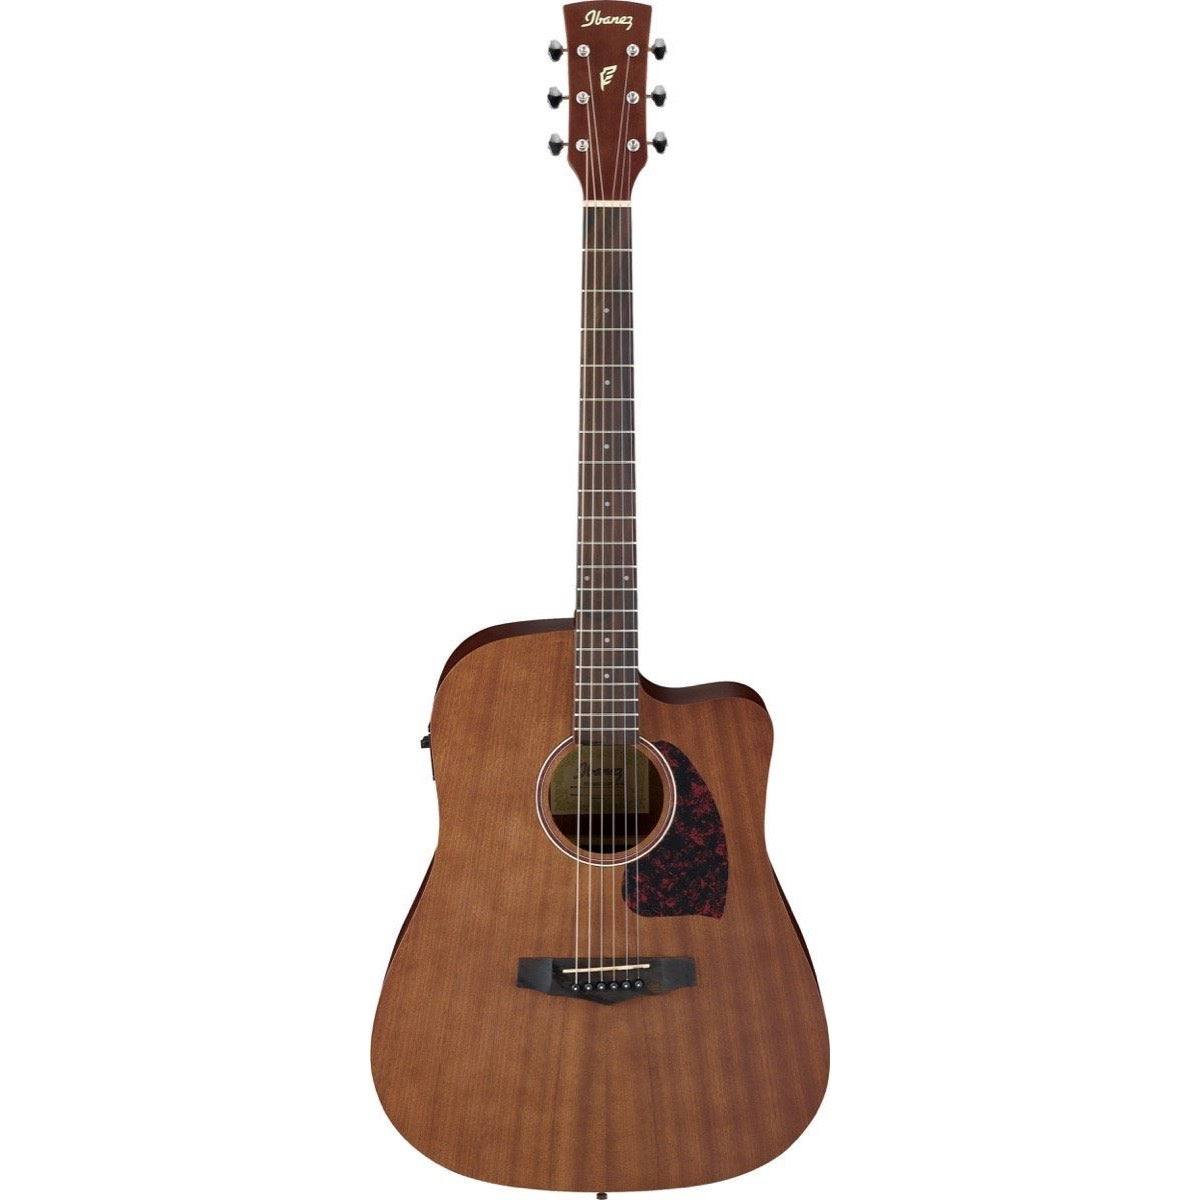 Ibanez PF12MHCE Performance Acoustic-Electric Guitar, Open Pore Natural